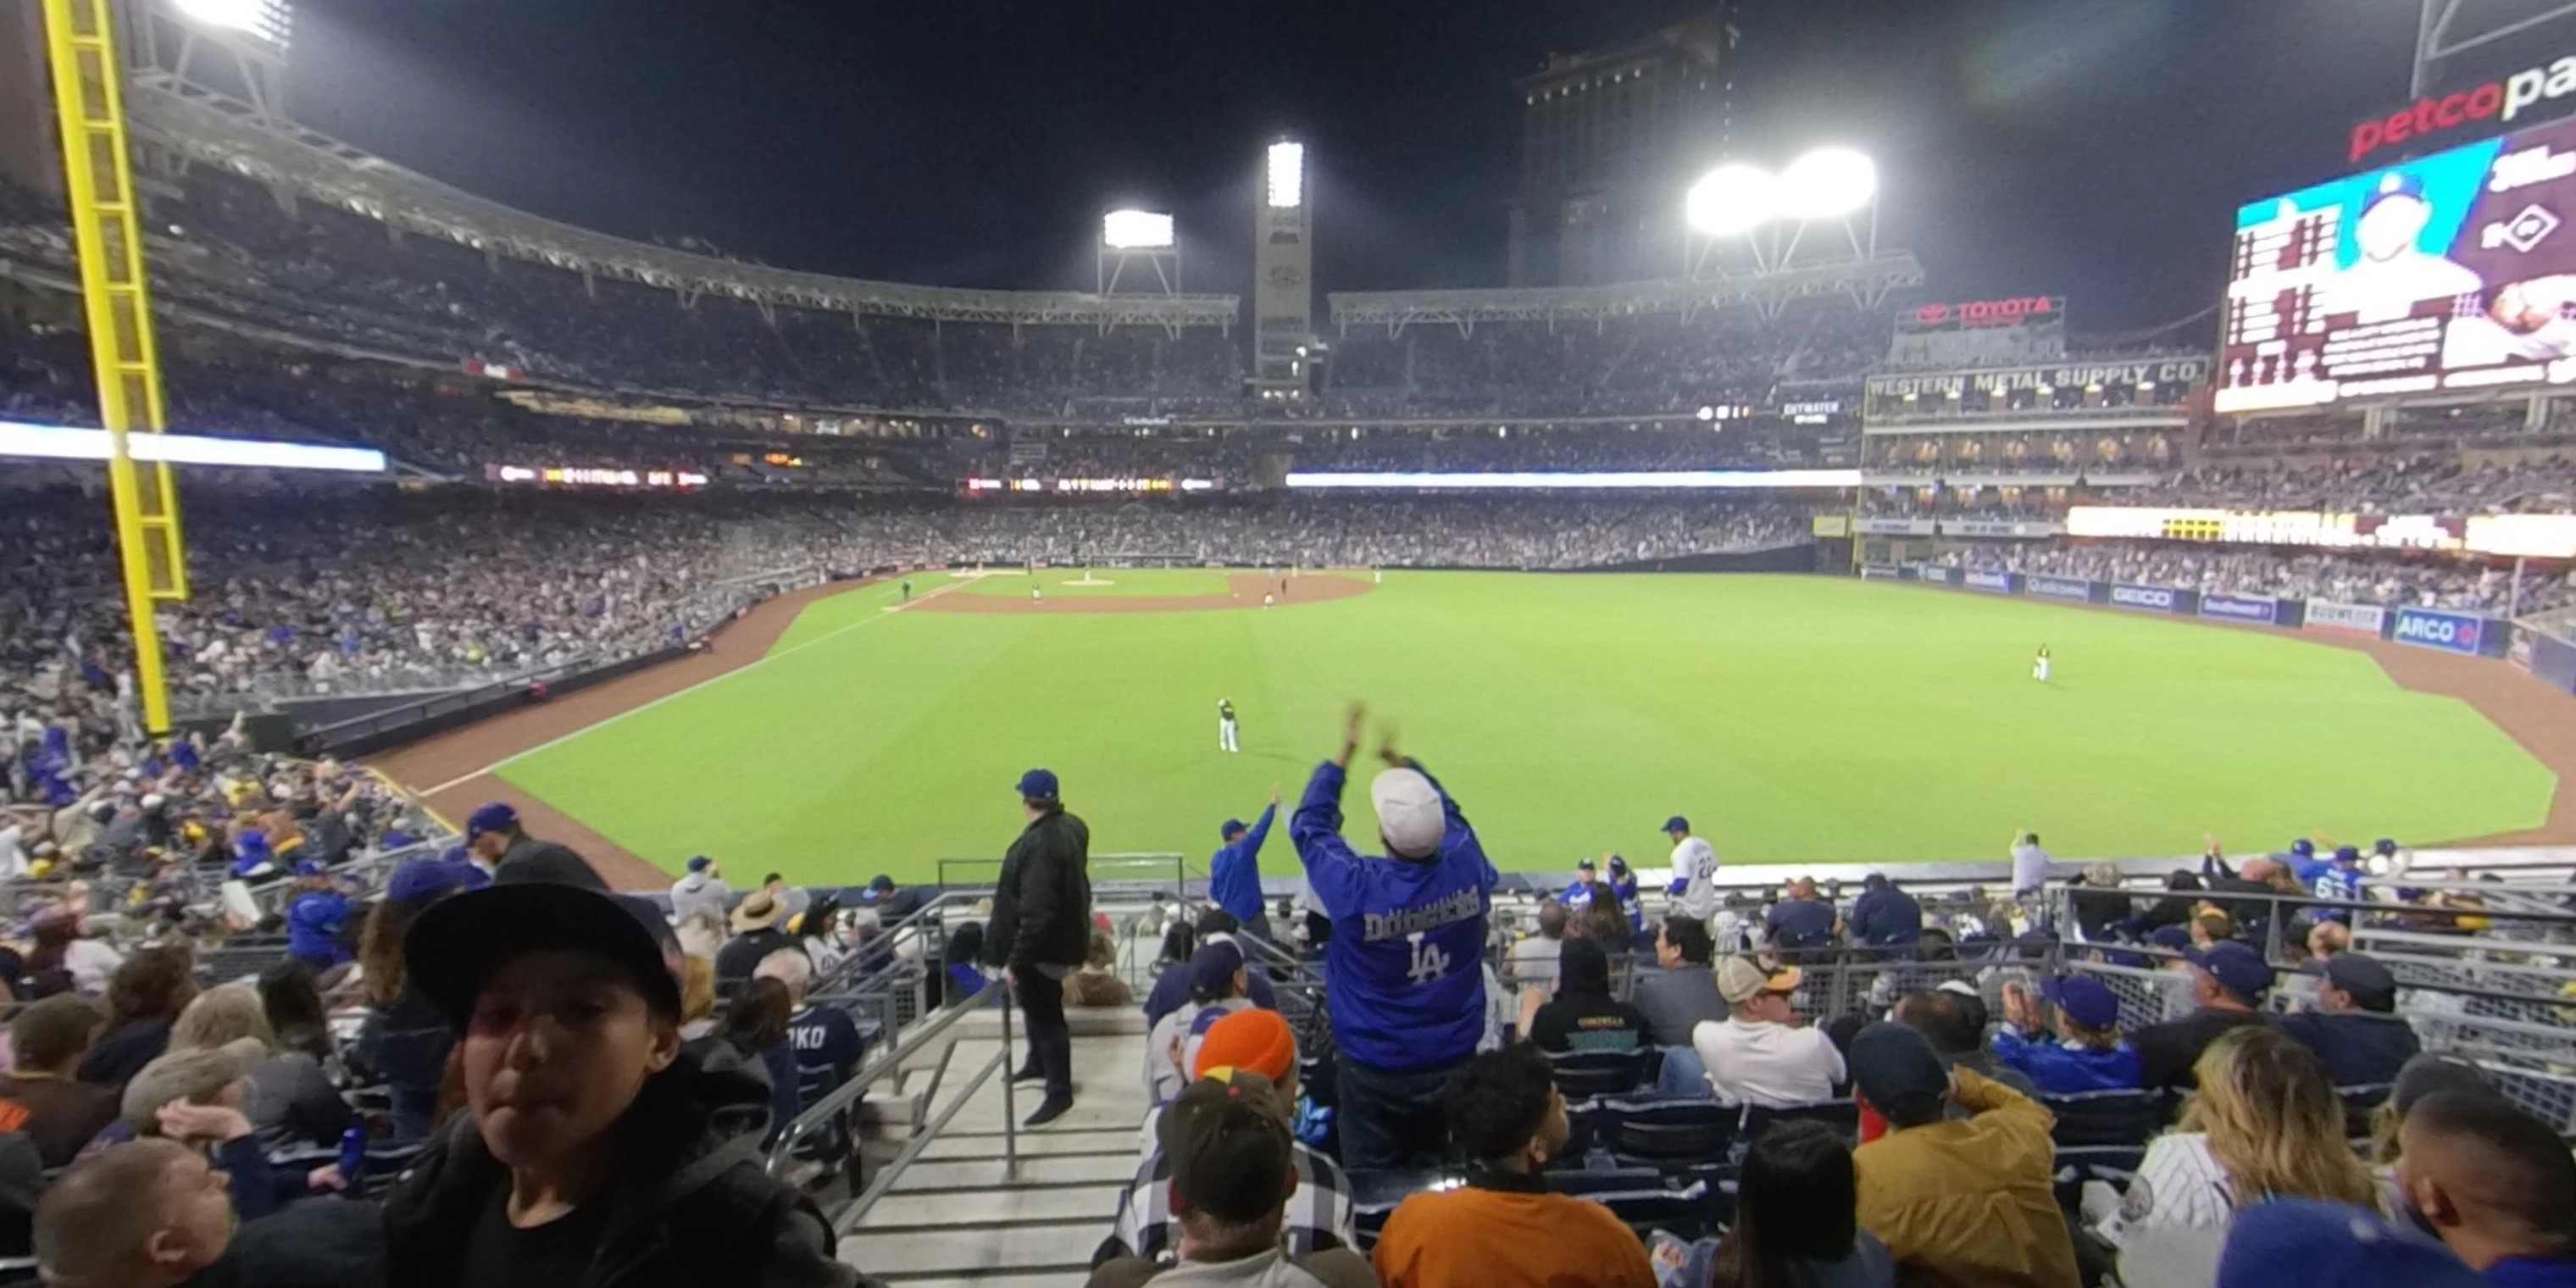 section 131 panoramic seat view  for baseball - petco park